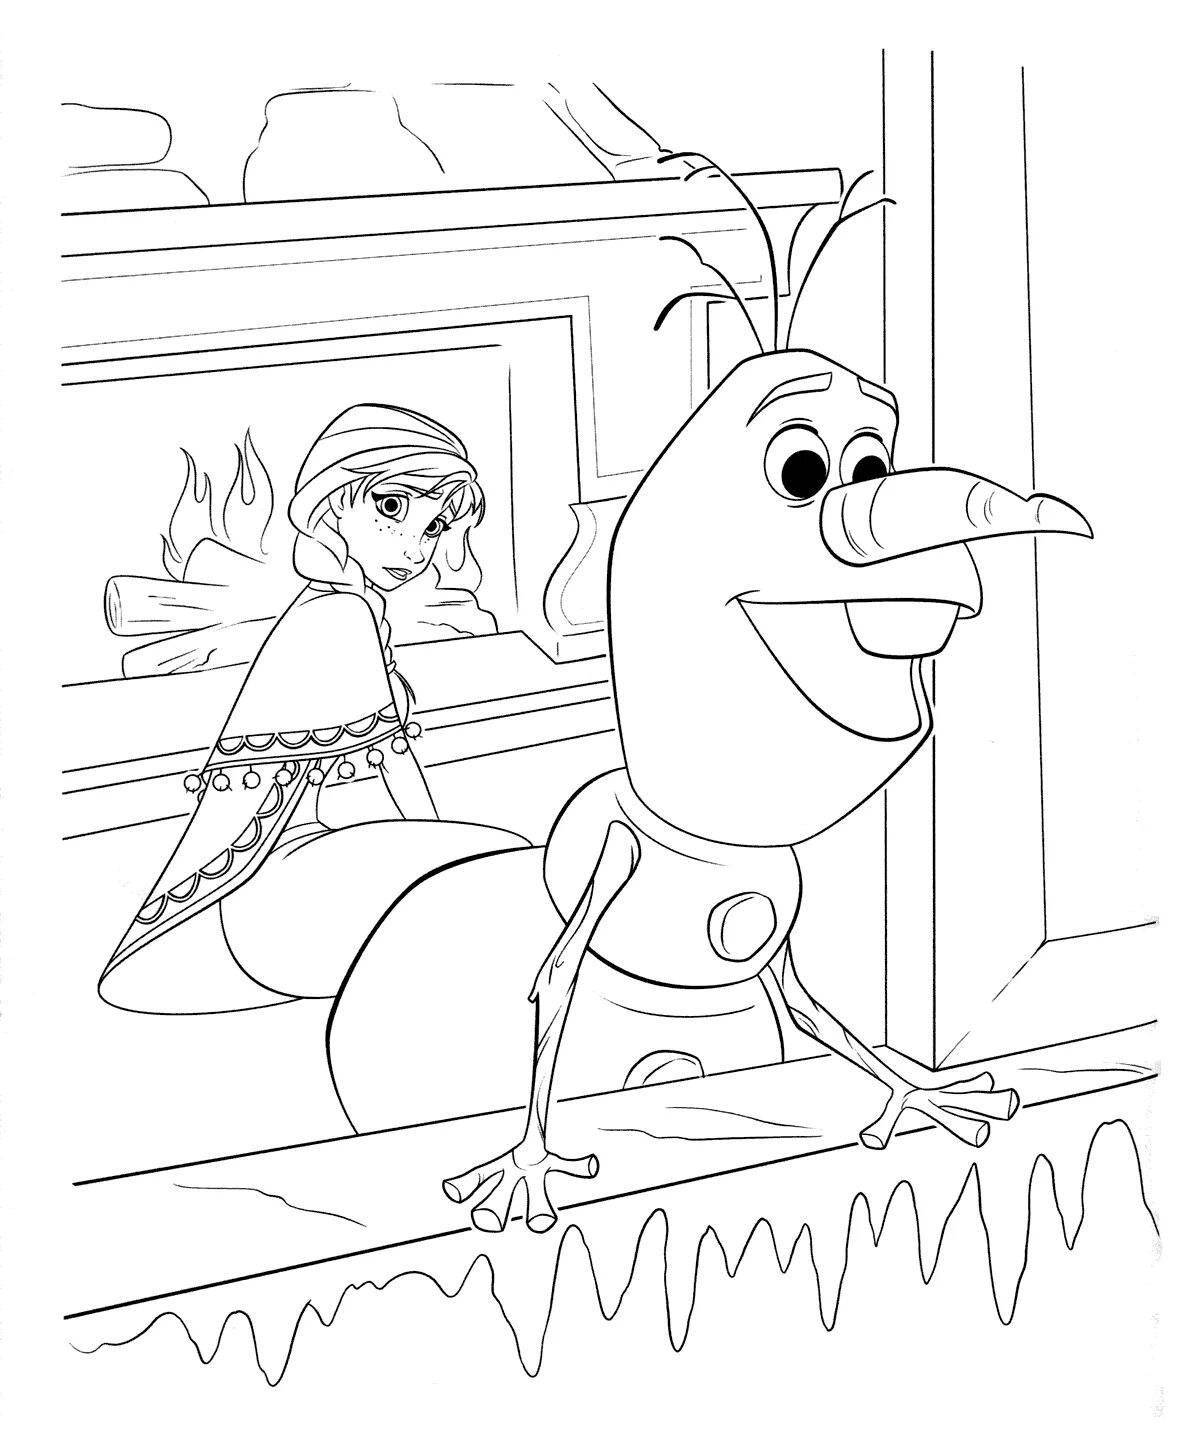 Anna and Olaf fun coloring